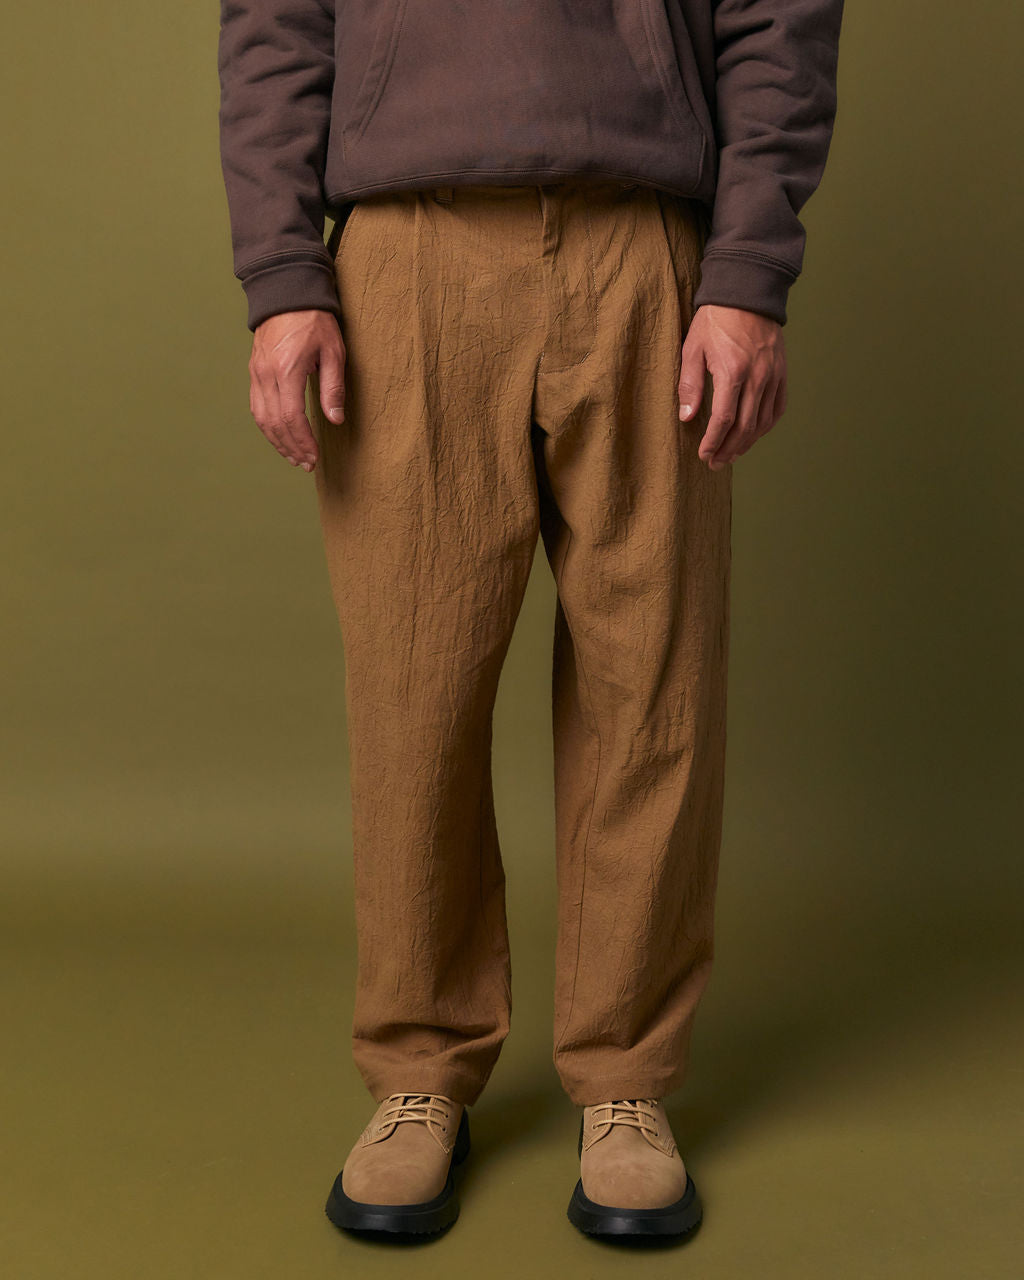 Pleated Trouser - Textured Earth